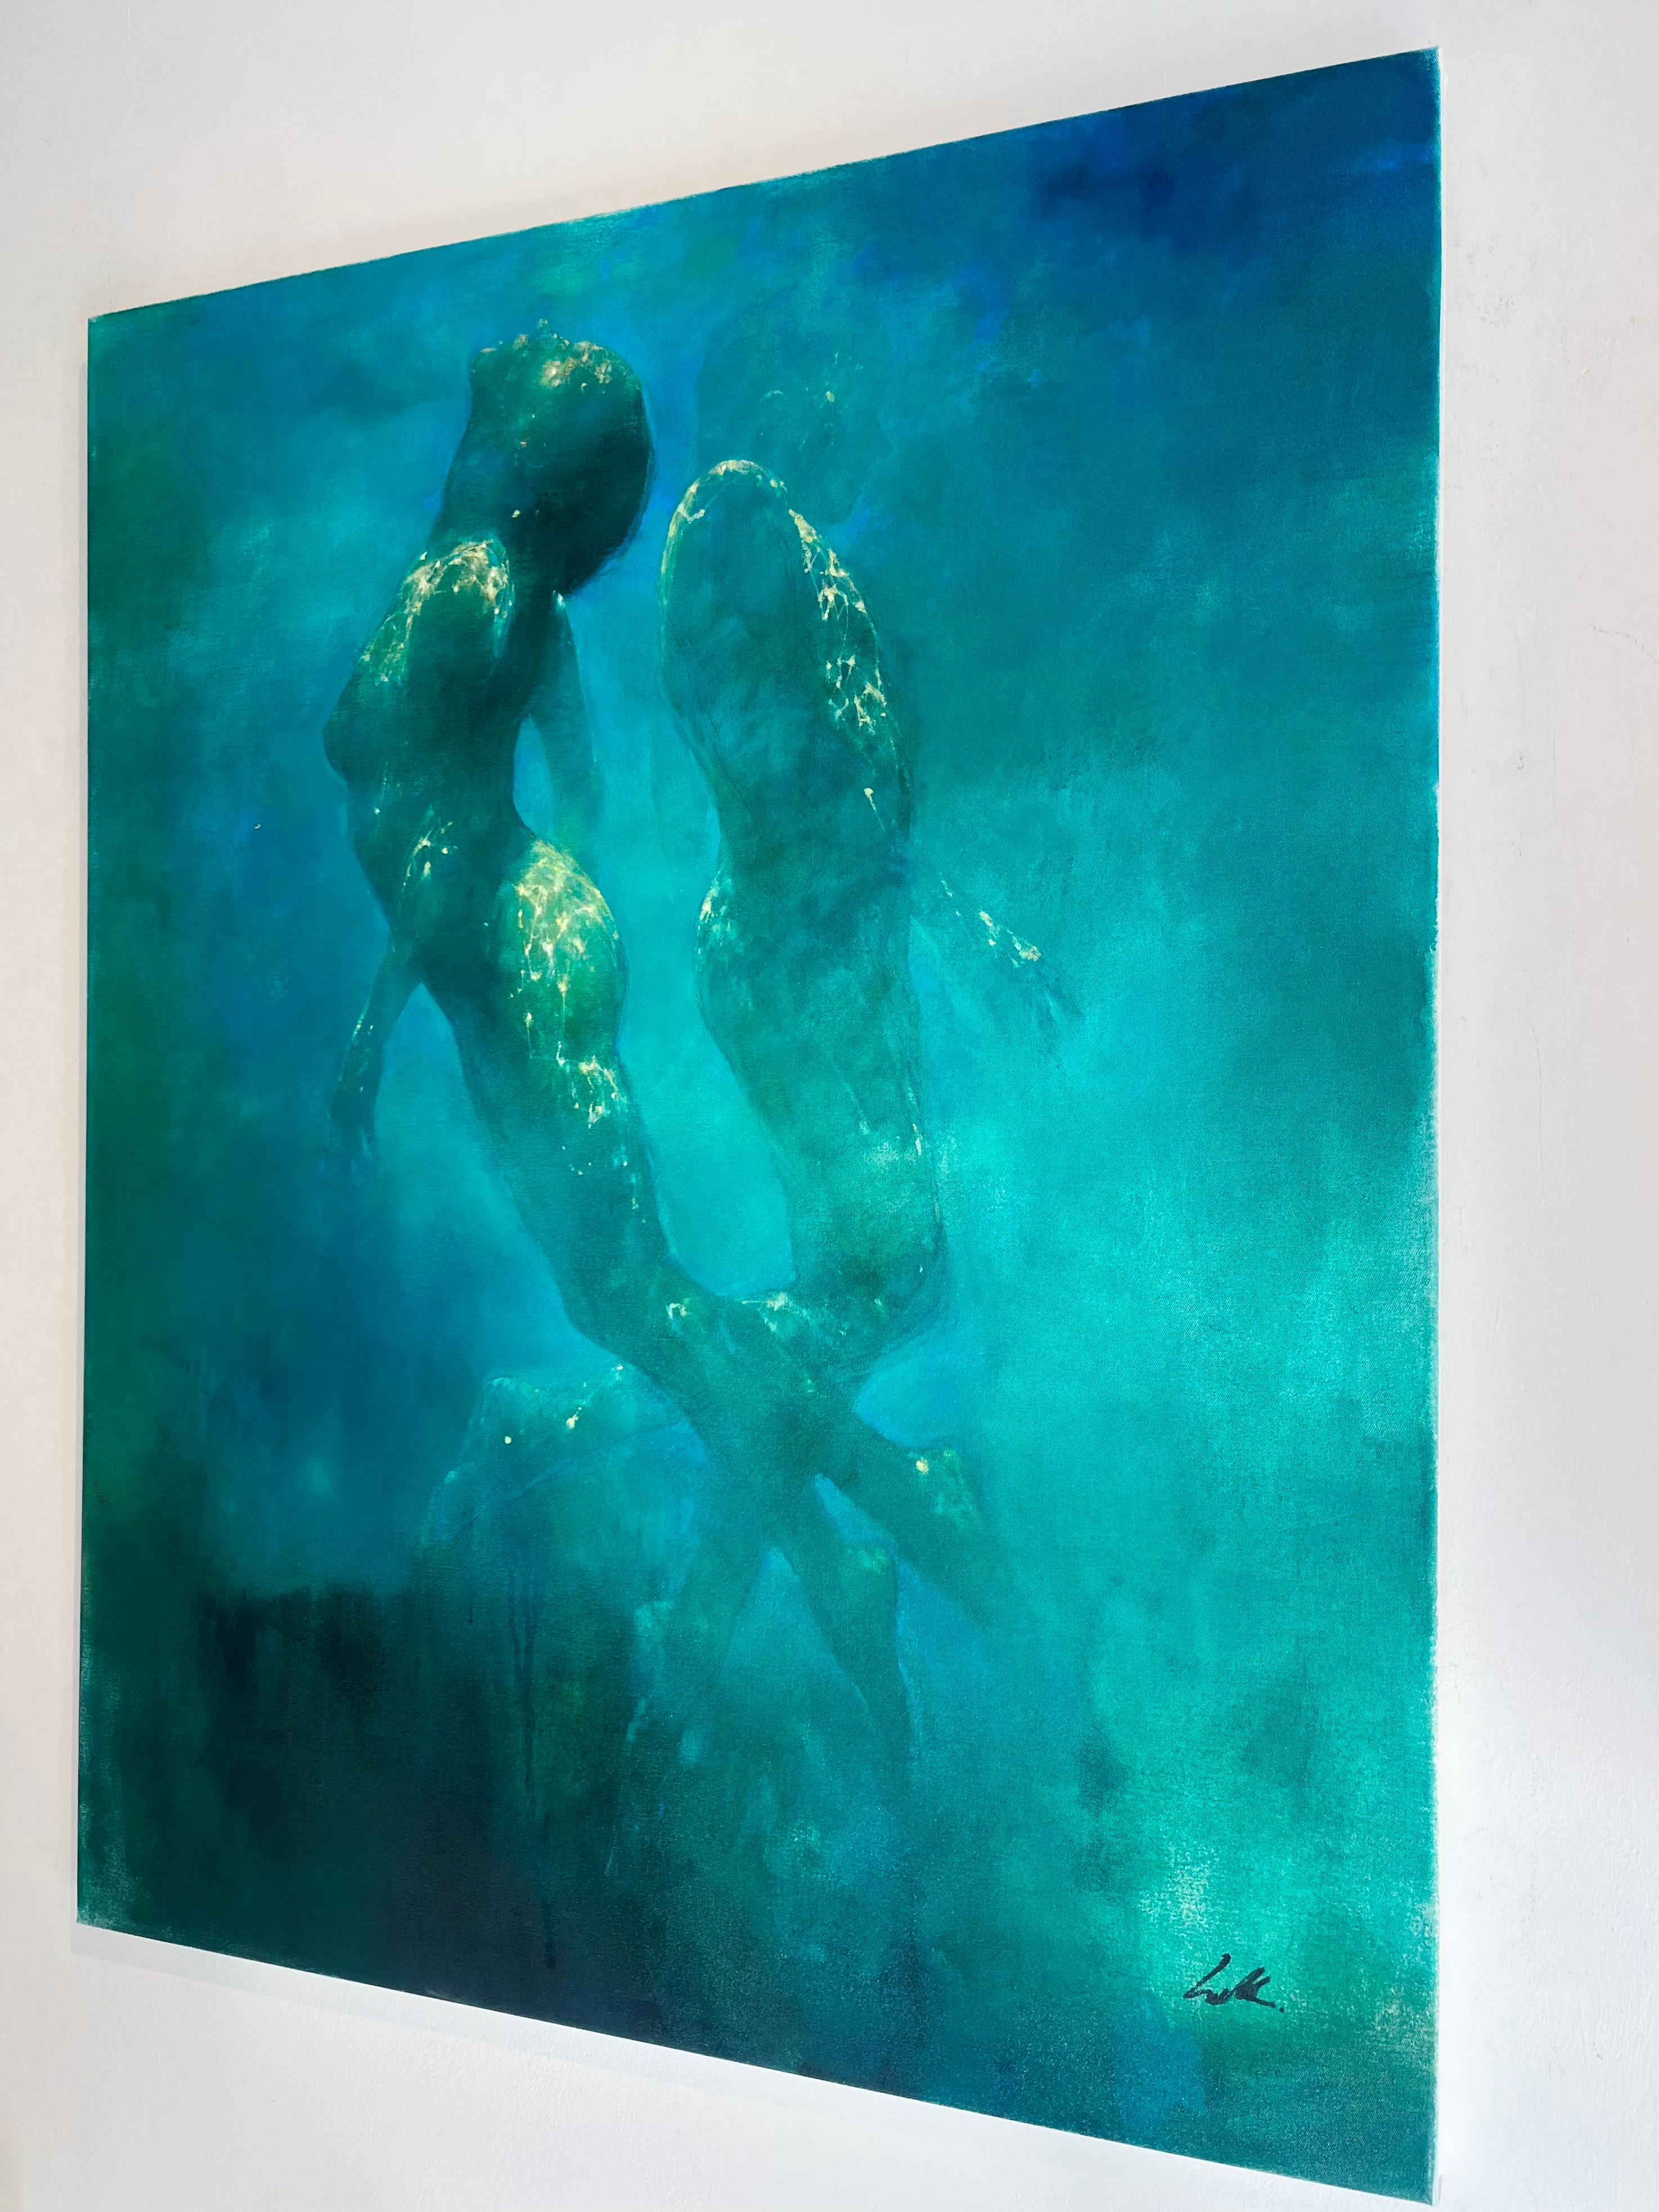  Ocean Whispers - abstract art underwater nude human figurative painting - Abstract Expressionist Painting by Bill Bate